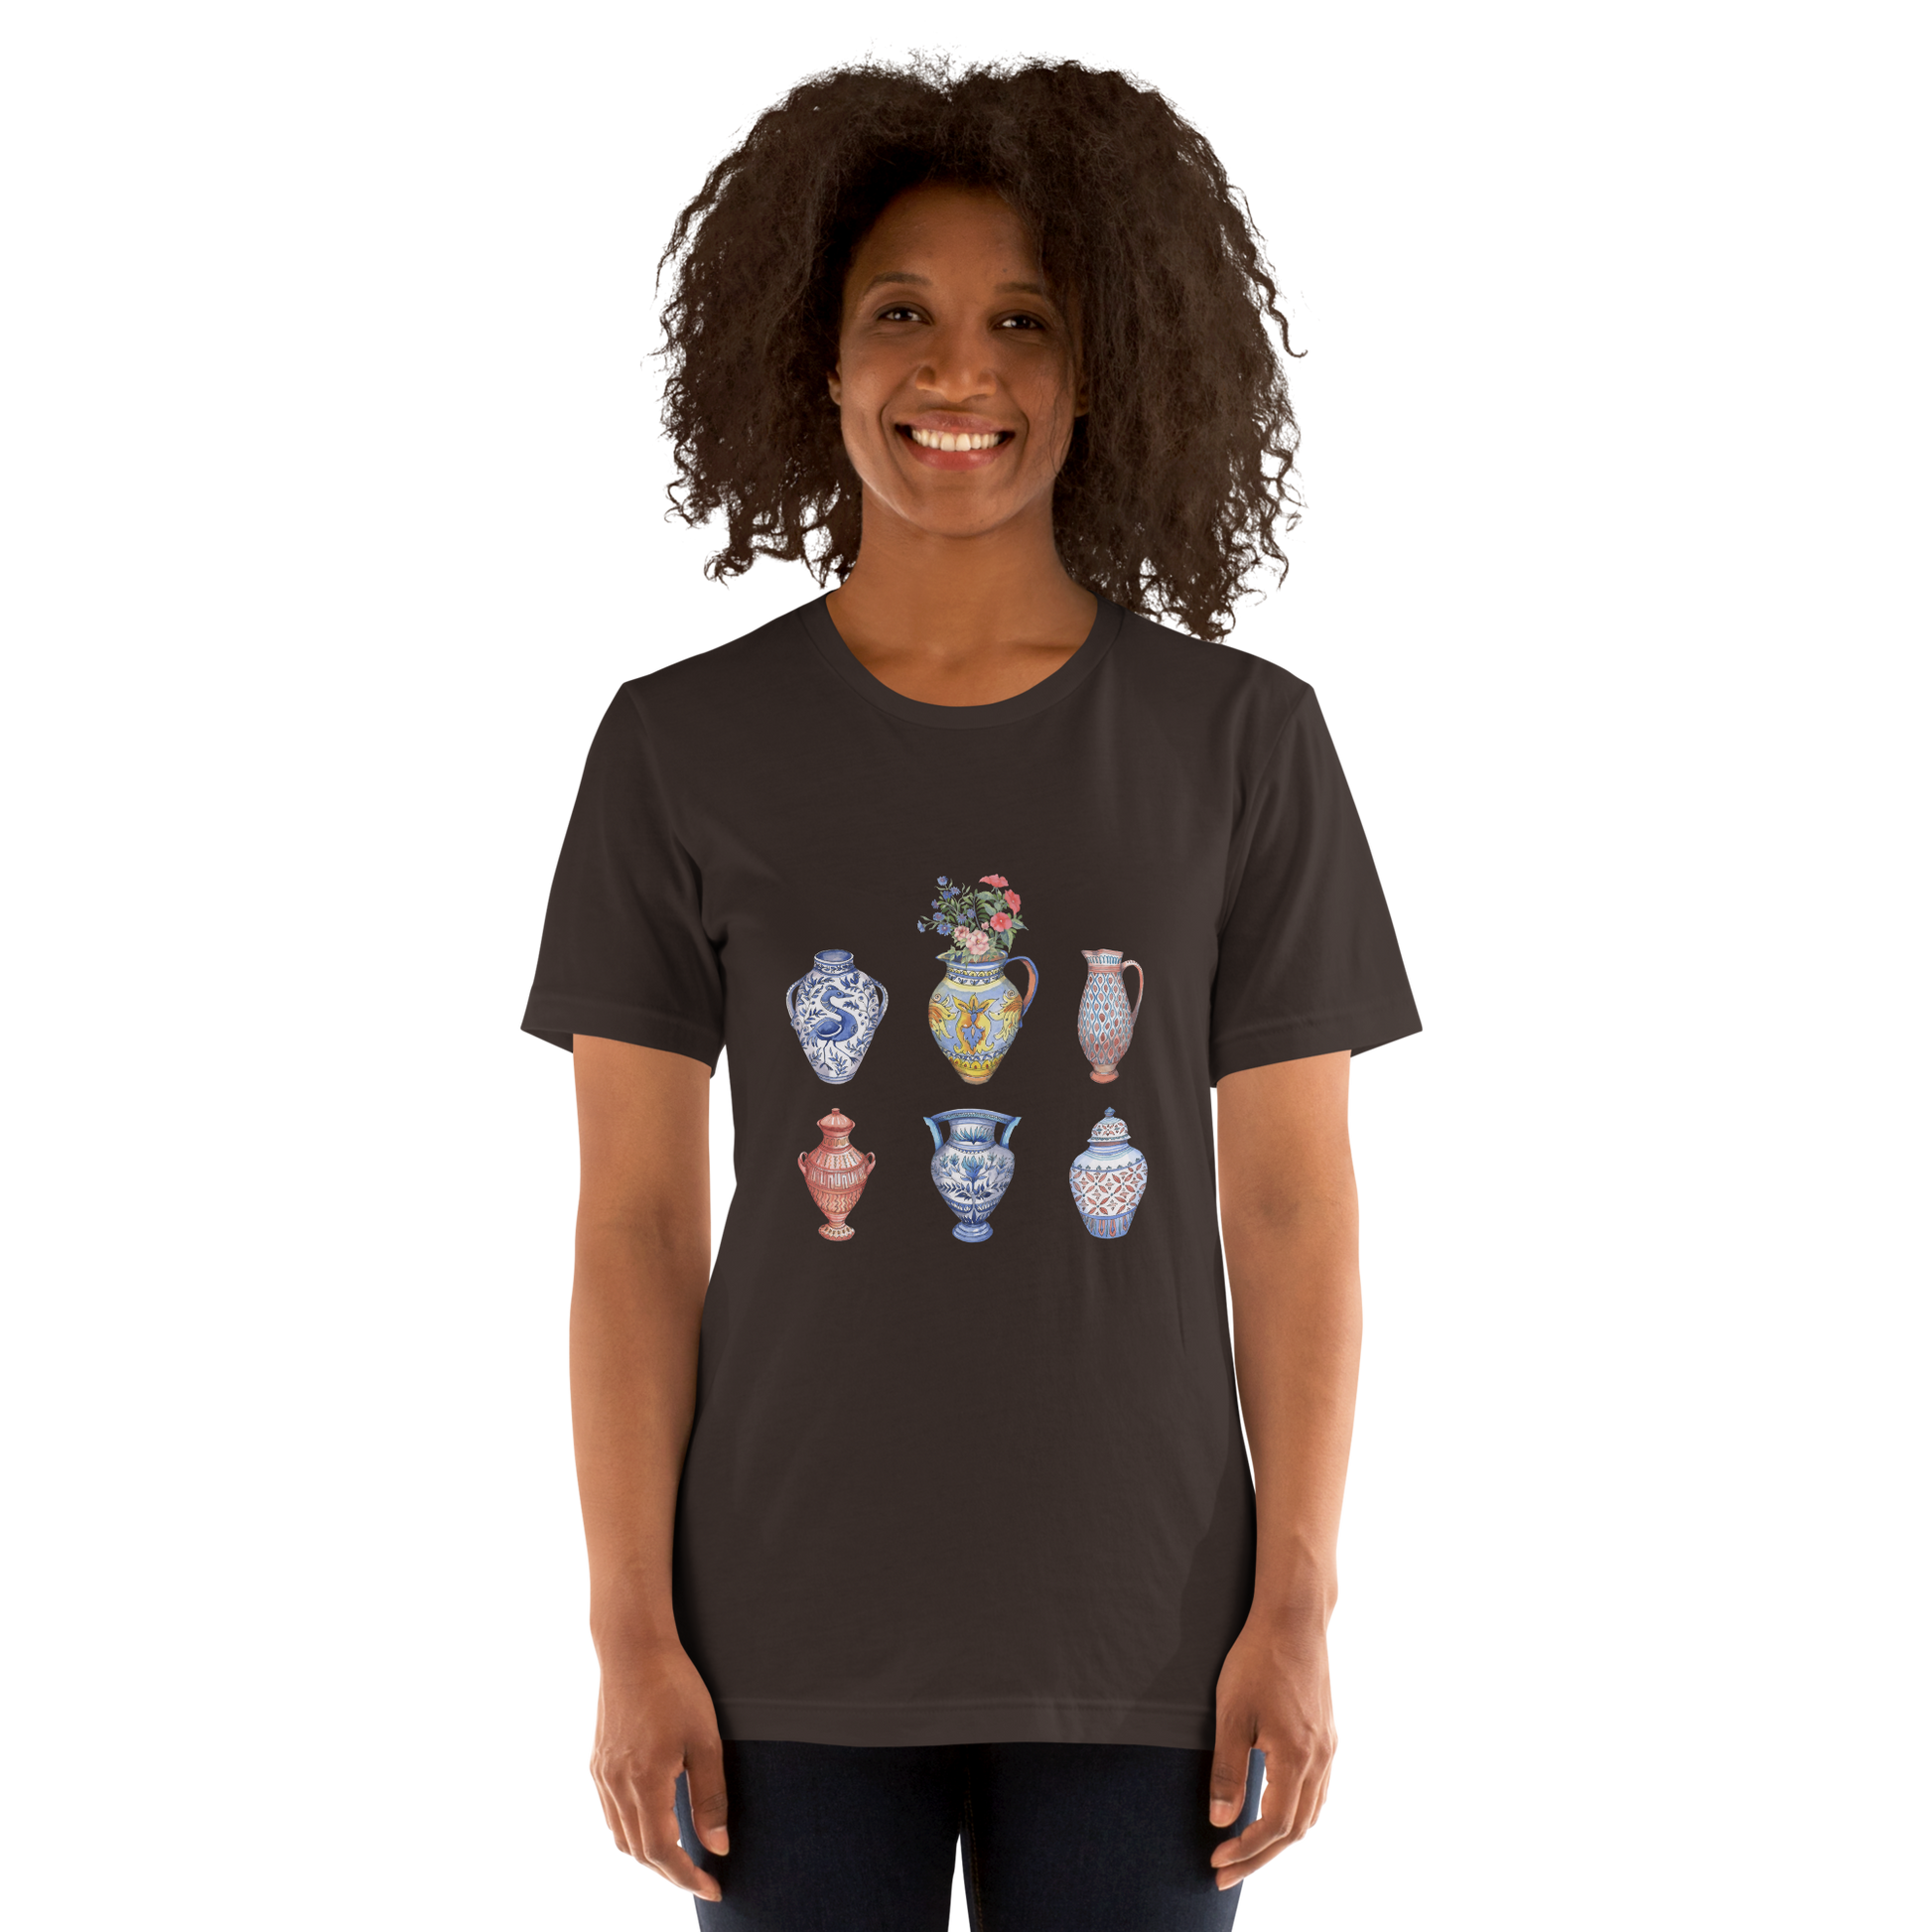 Woman wearing a Brown Premium Vase Tee featuring a chic vase graphic on the chest - Artsy Graphic Vase Tees - Boozy Fox